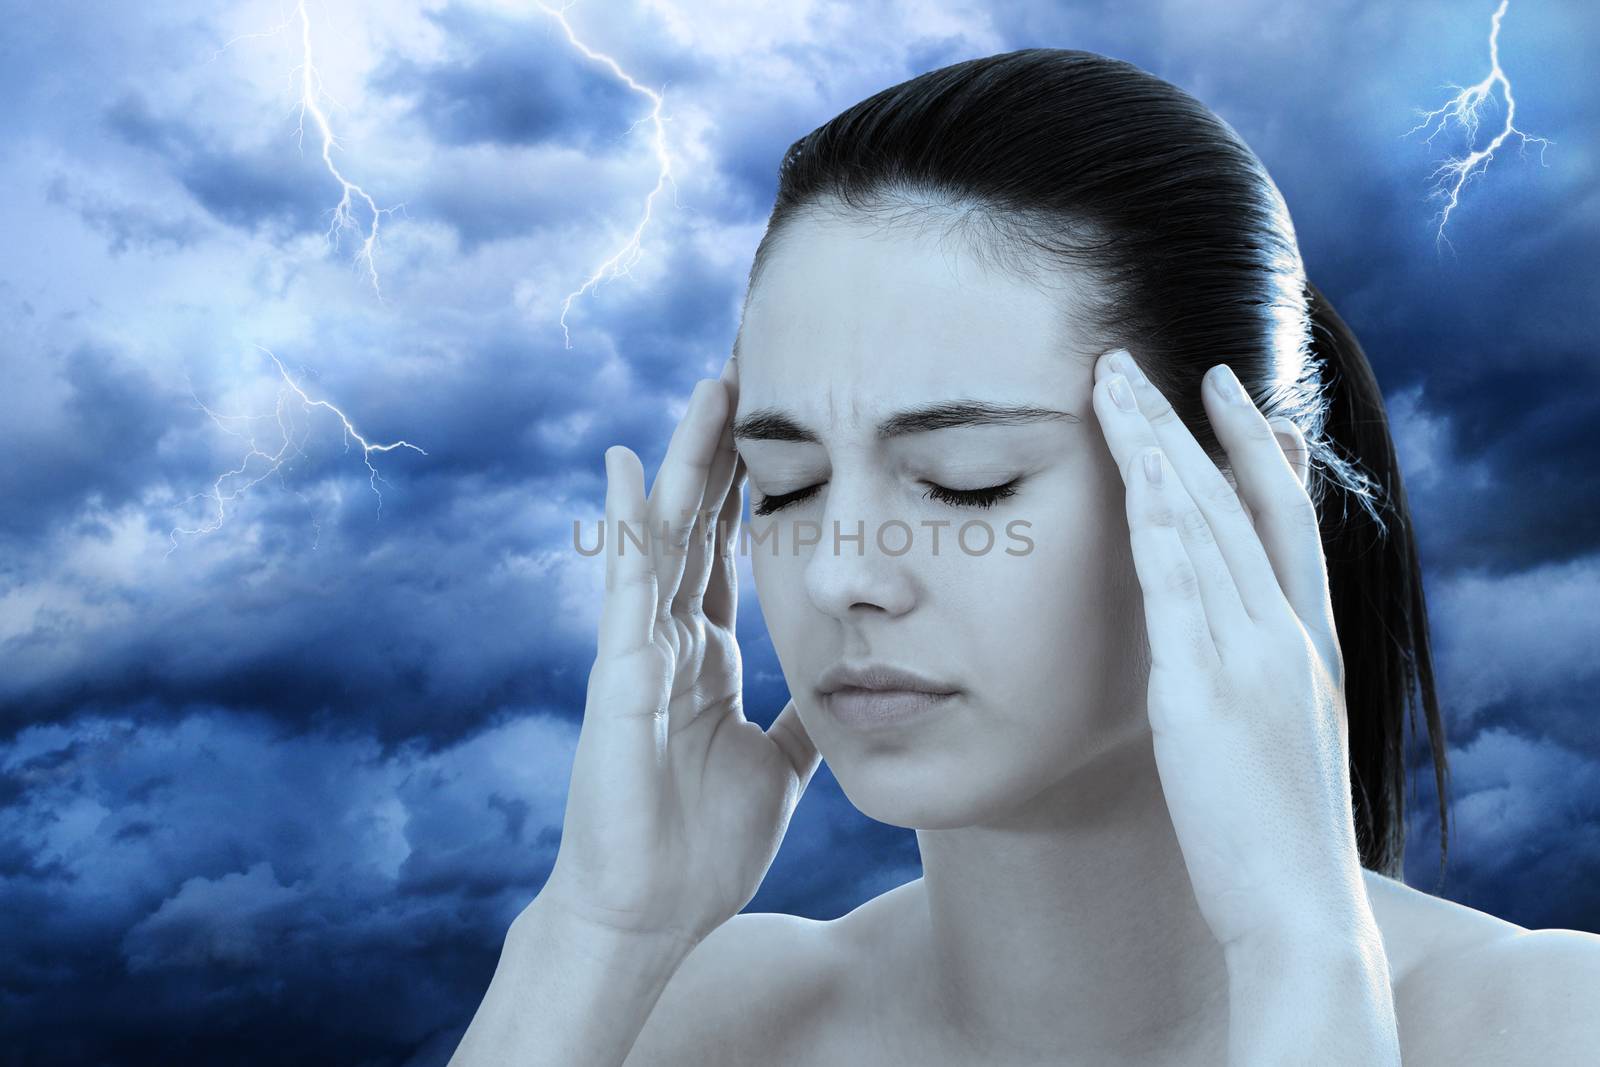 Close up conceptual portrait of young unhappy woman against dark clouds with lightning. Girl with headache and eyes closed.  